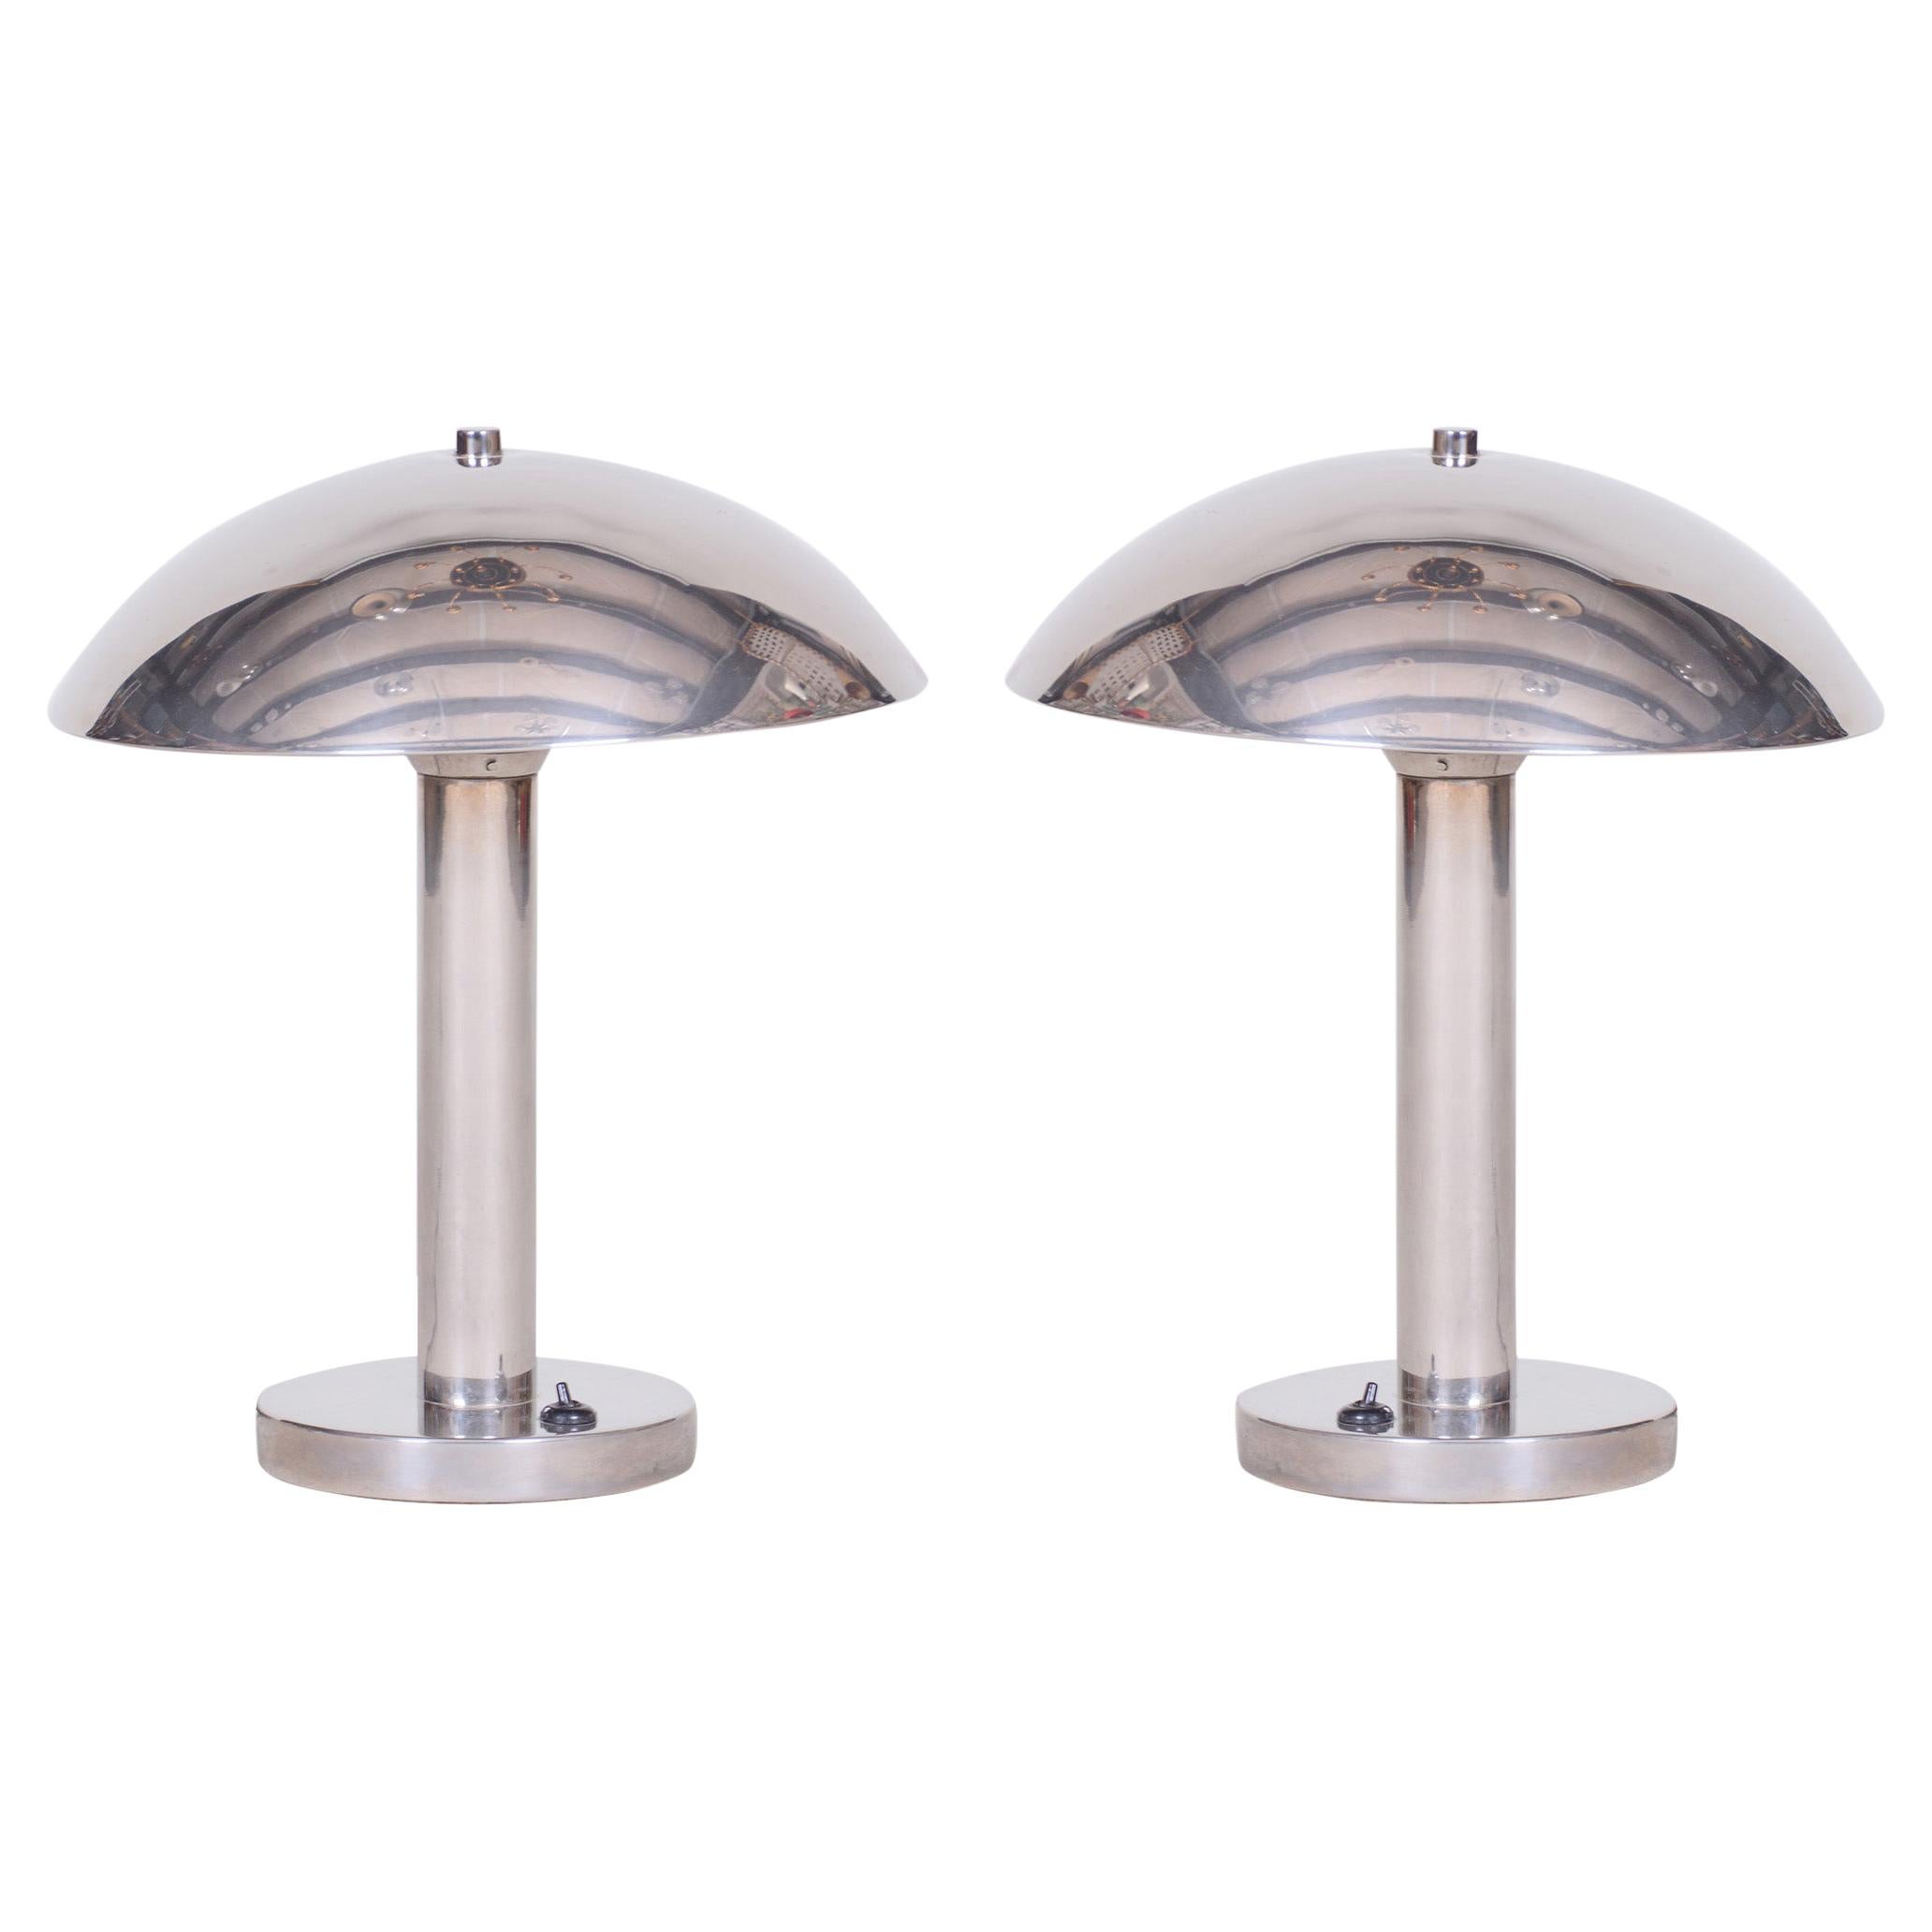 Pair of Czech Chrome Bauhaus Table Lamps, Restored and Electrified, 1930s